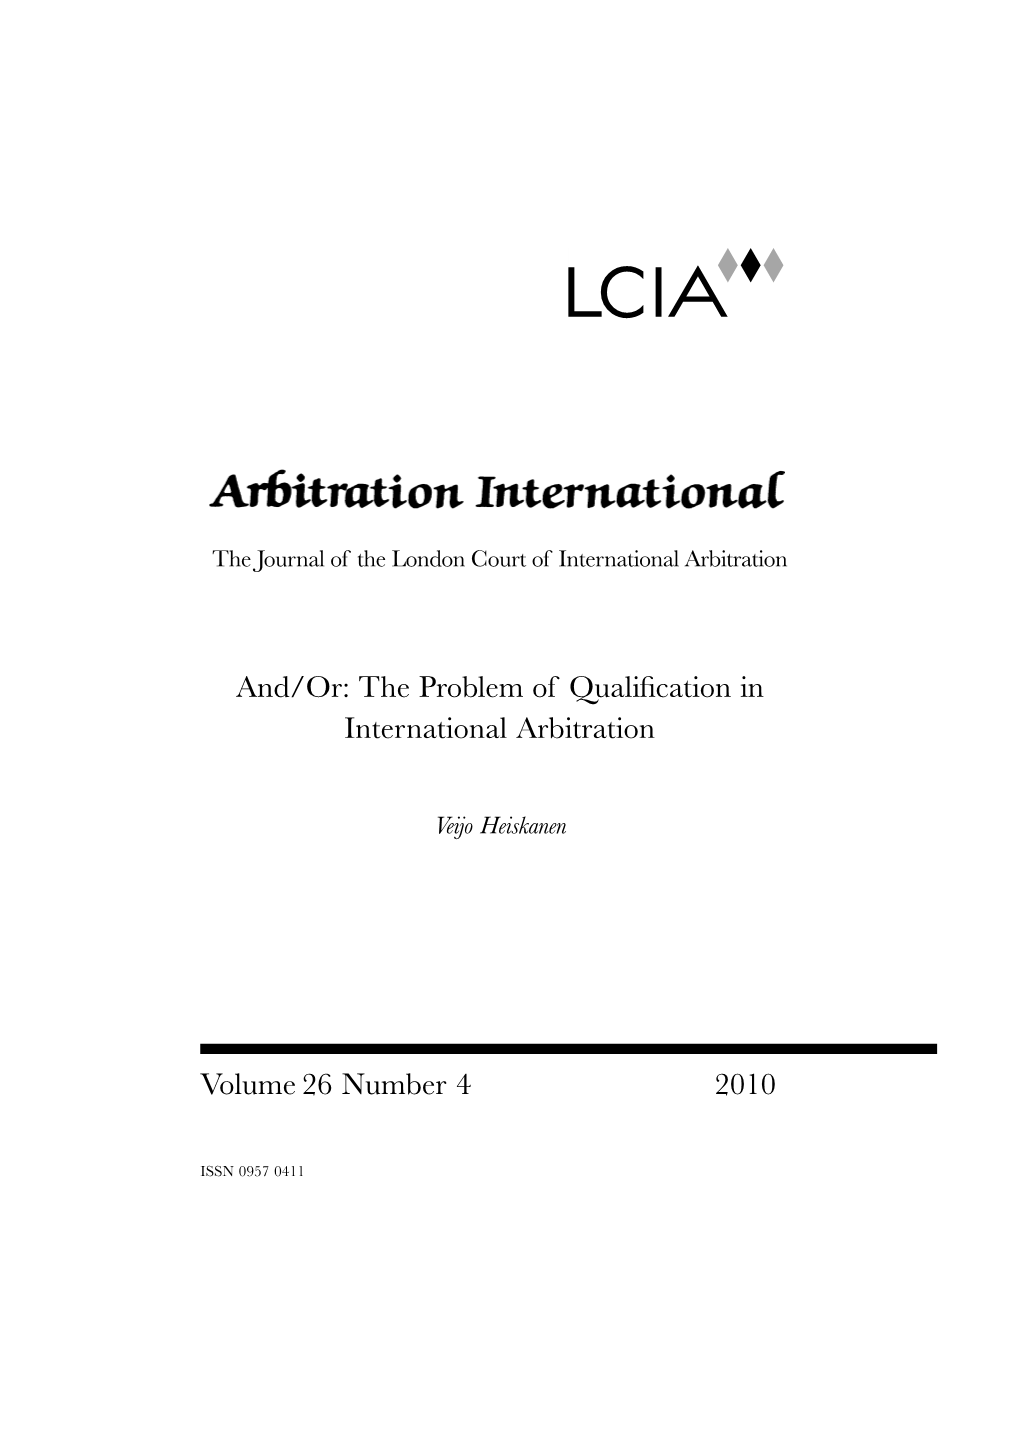 And/Or: the Problem of Qualification in International Arbitration